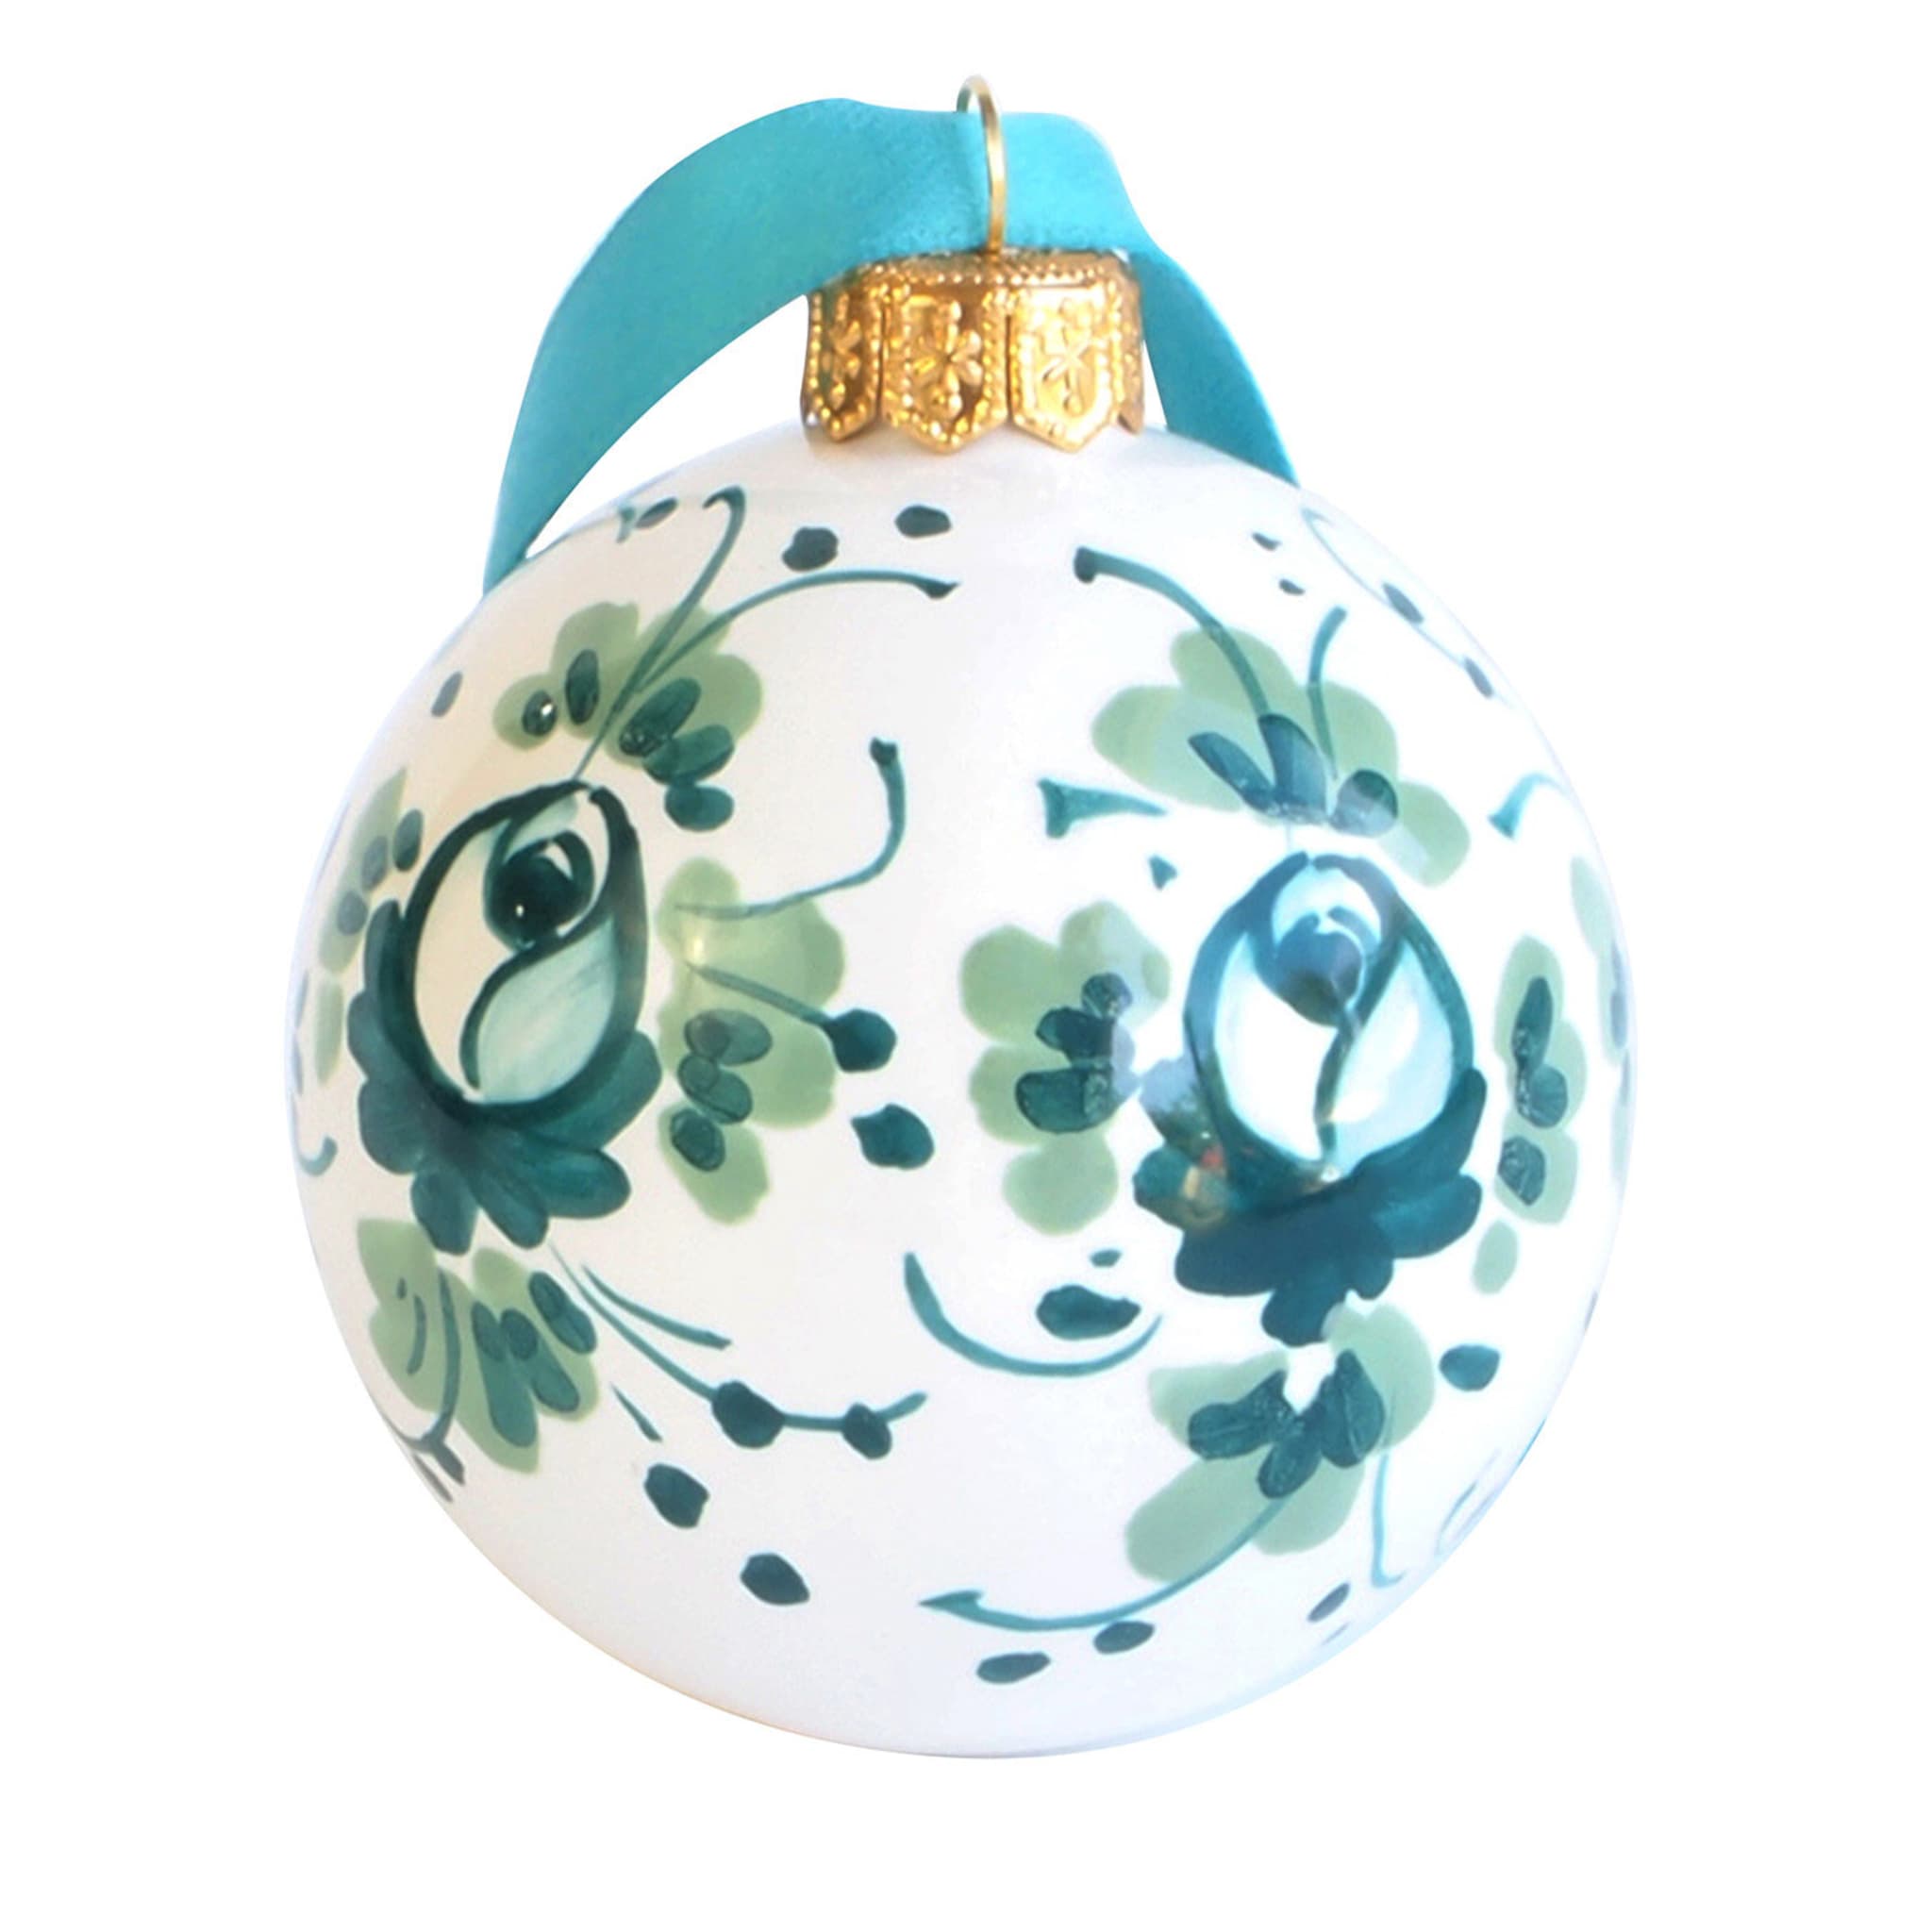 Turquoise Floral Christmas Ball Ornament #2 - Main view